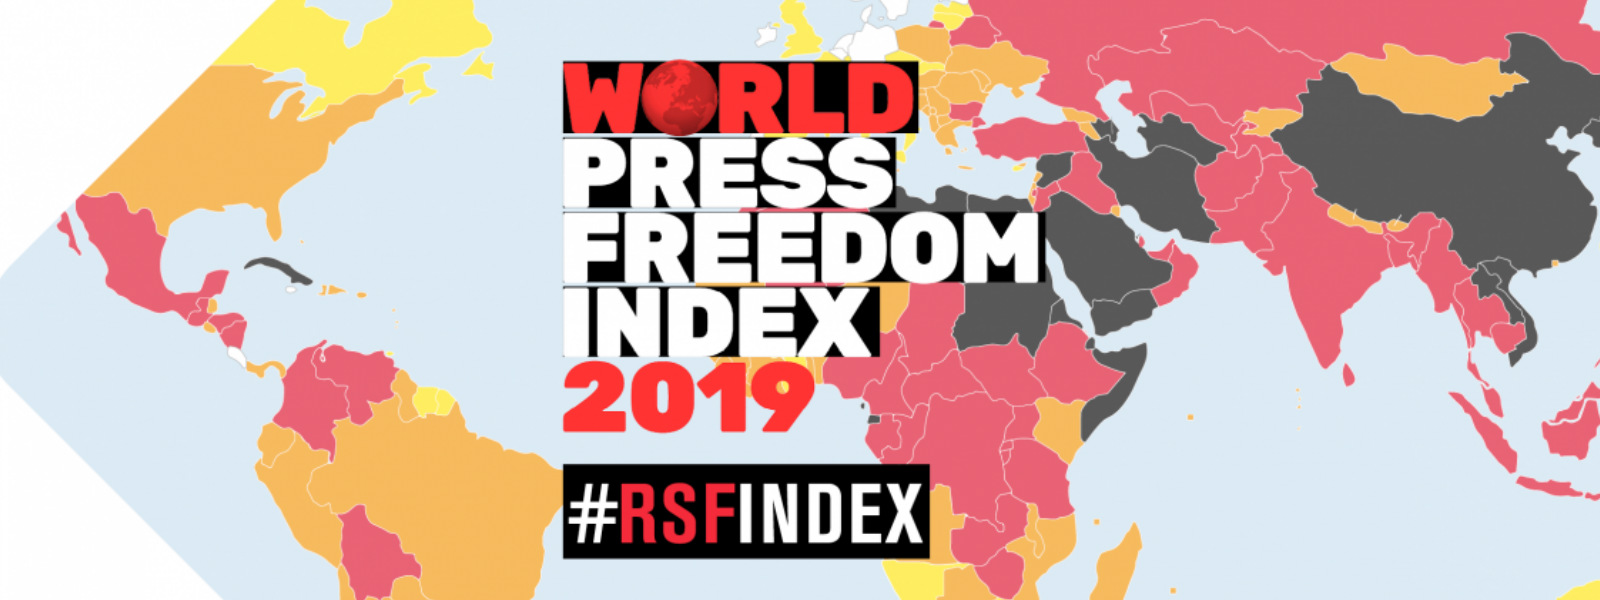 SL up 5 positions in World Press Freedom Index